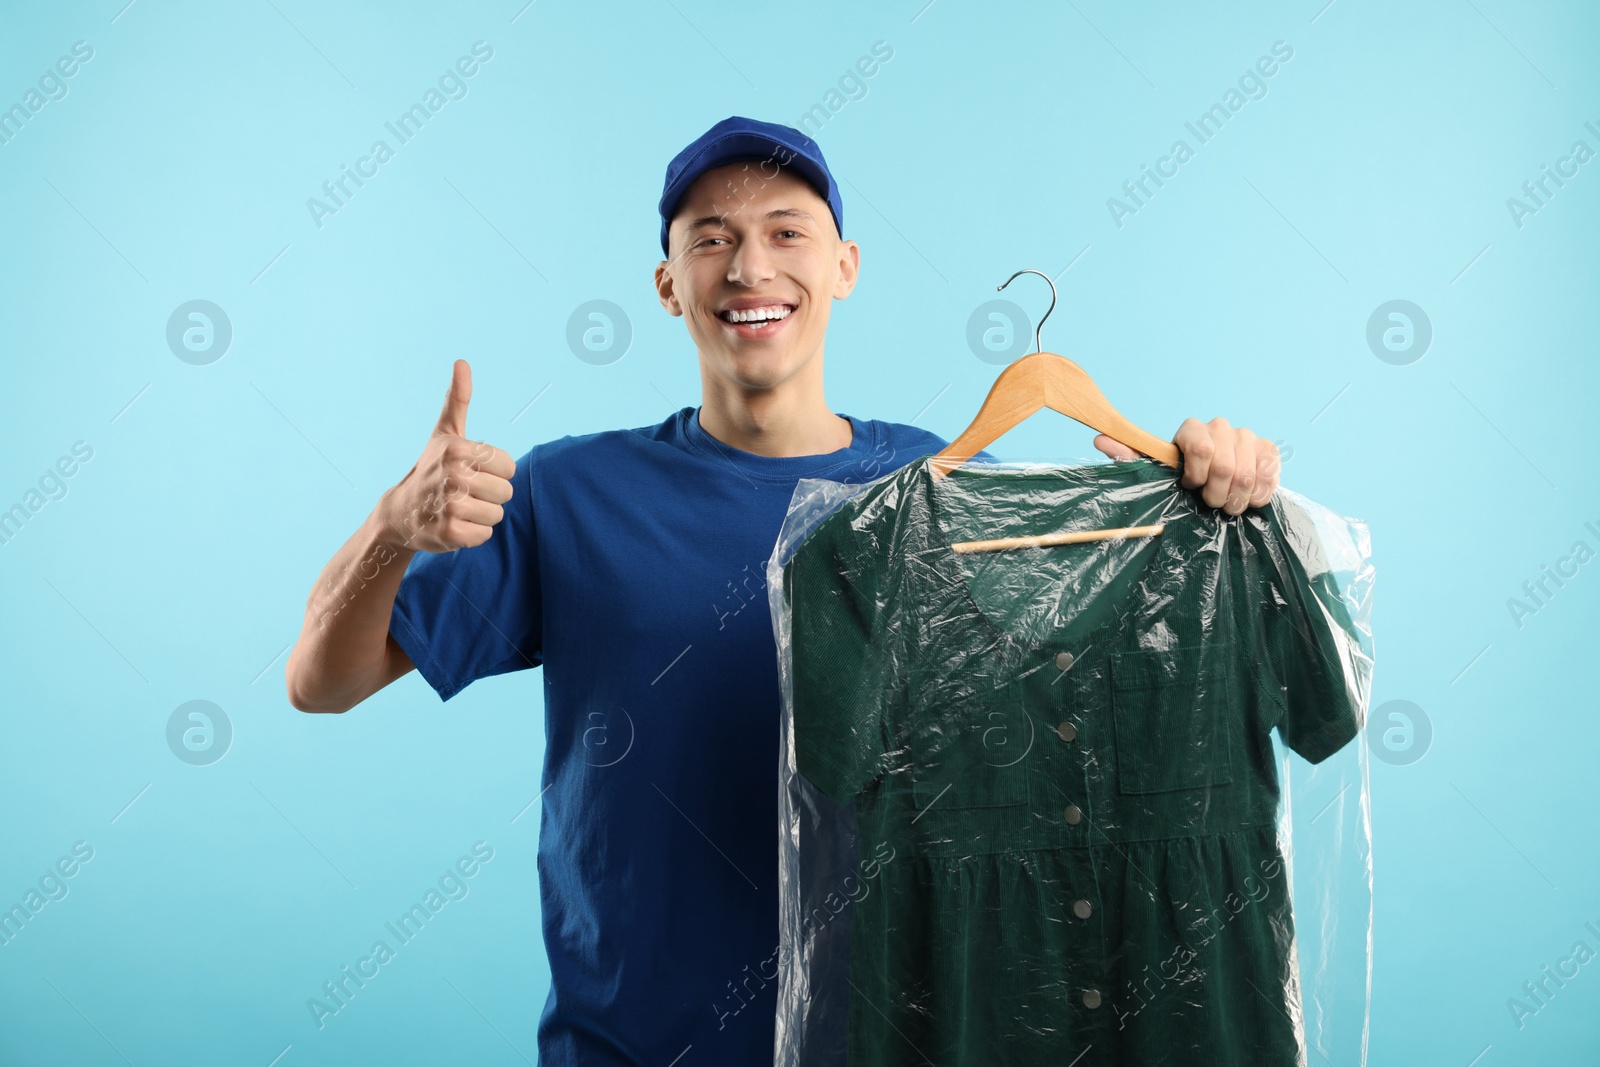 Photo of Dry-cleaning delivery. Happy courier holding dress in plastic bag and showing thumbs up on light blue background